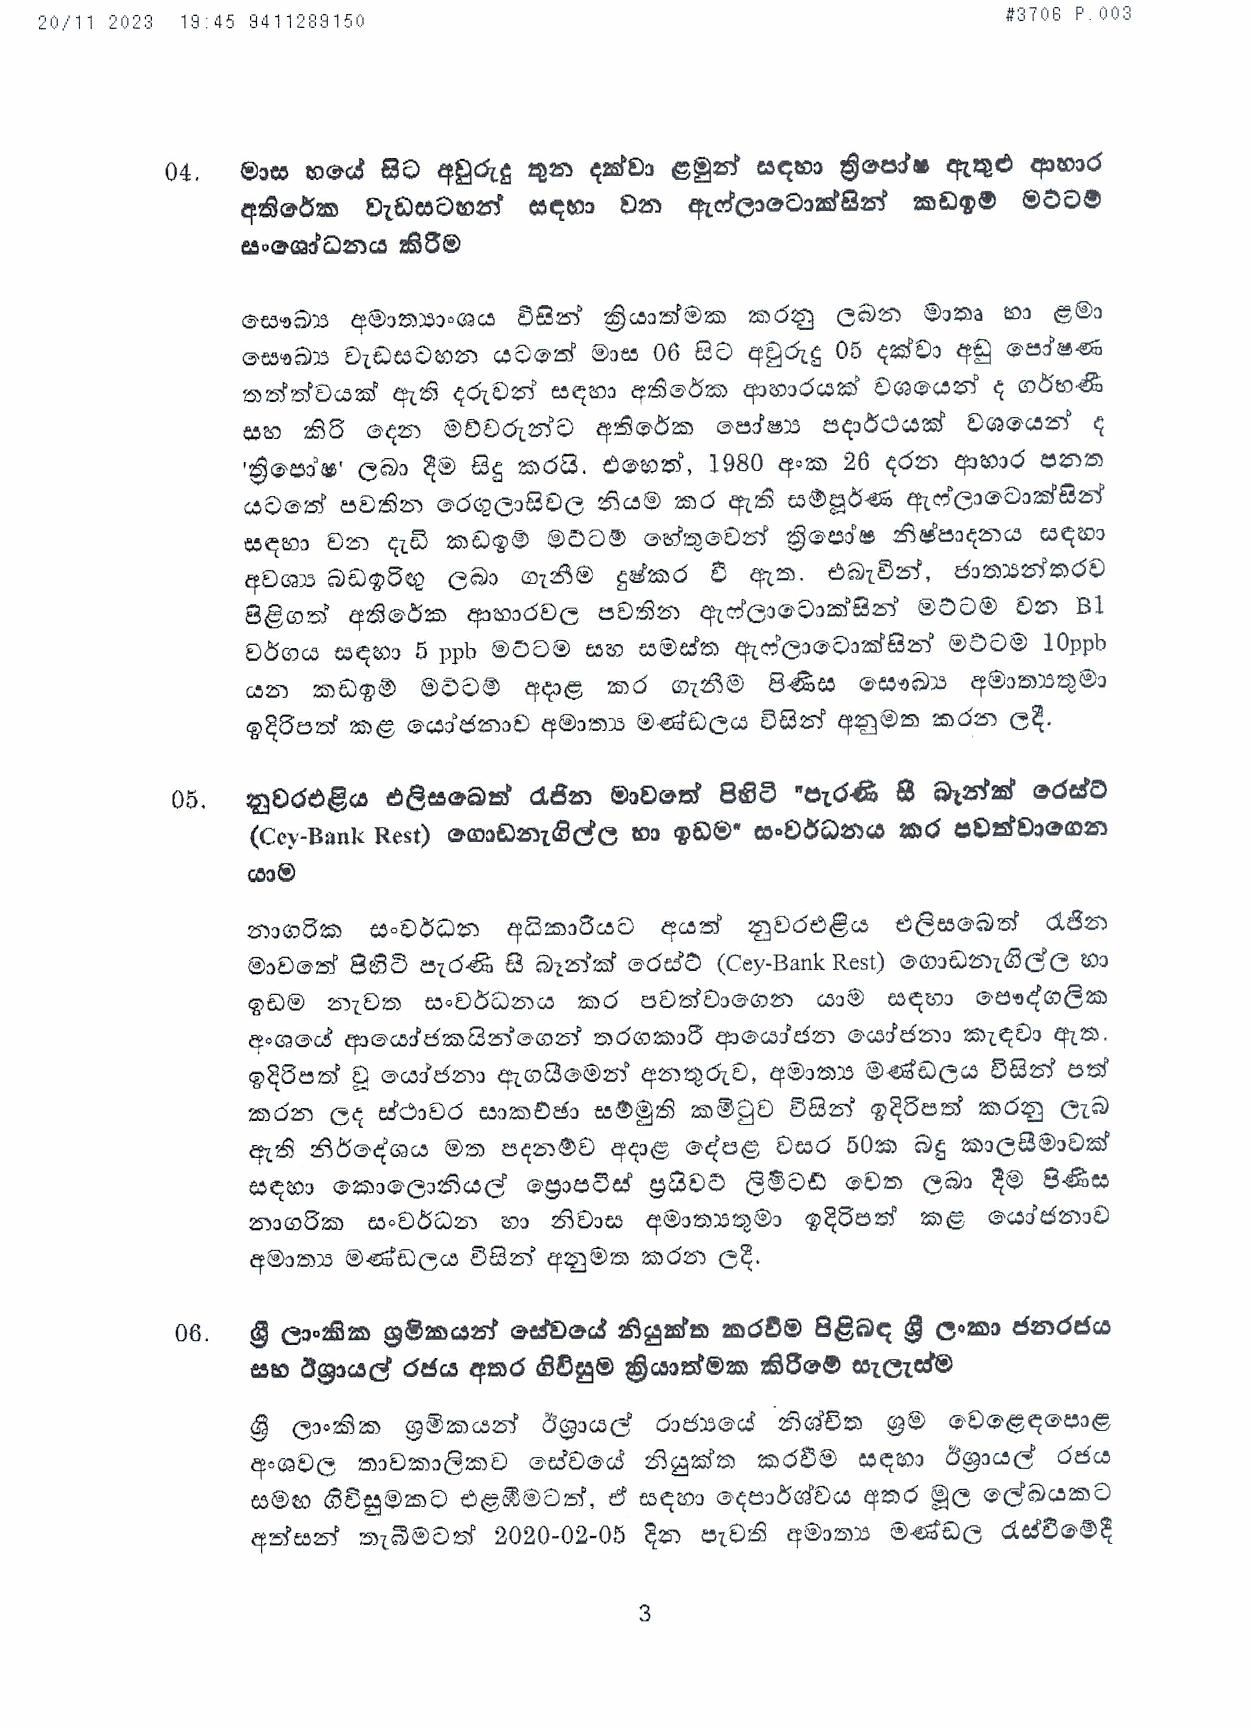 Cabinet Decisions on 20.11.2023 page 003